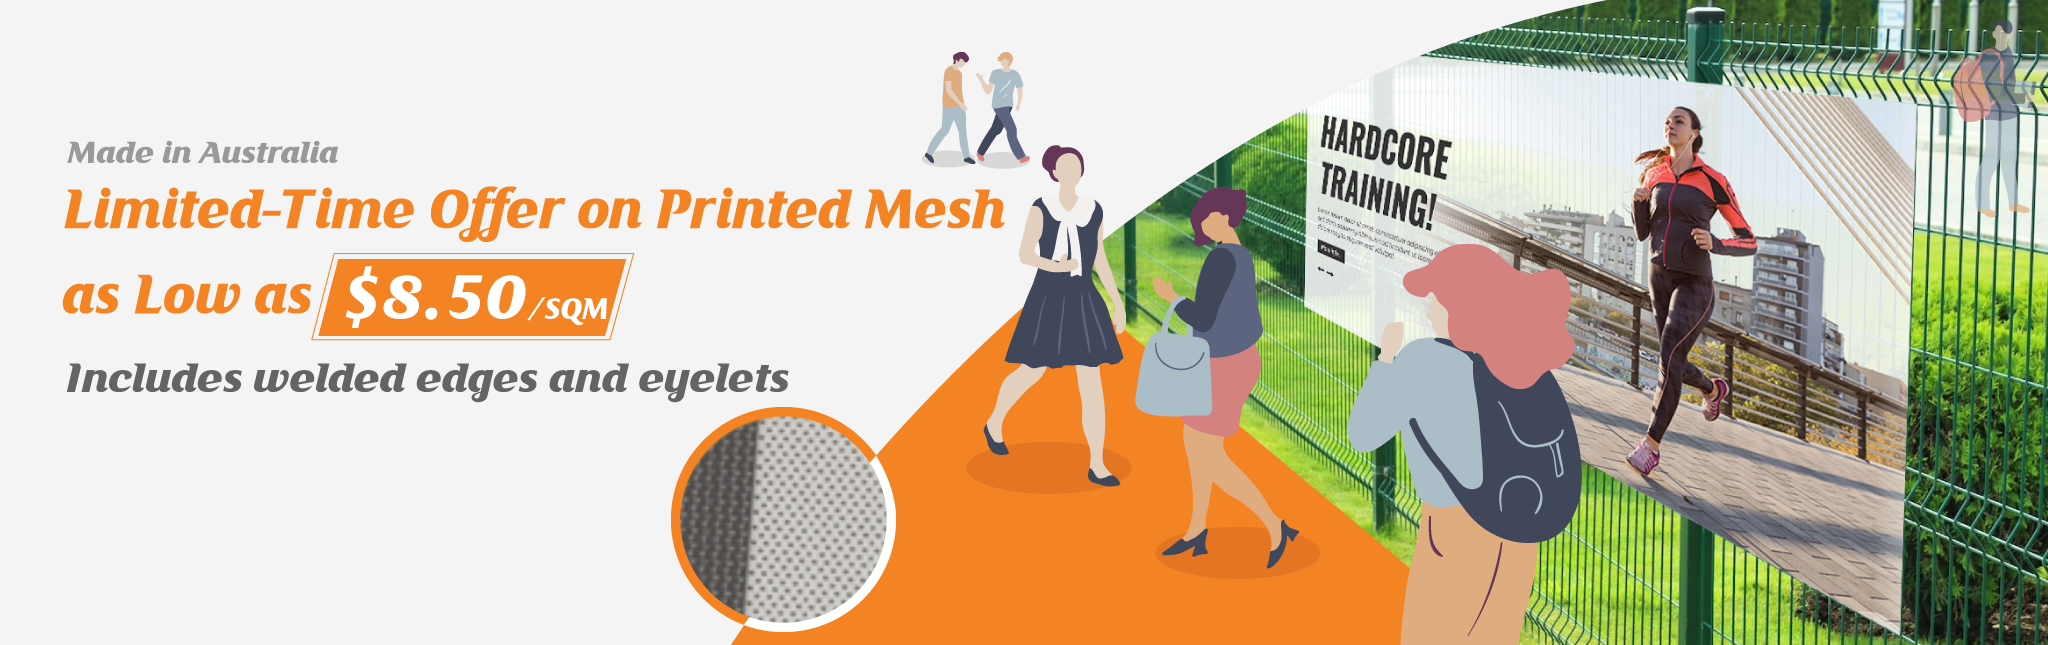 Linited Offer! Printed Mesh as low as $8.50/SQM!